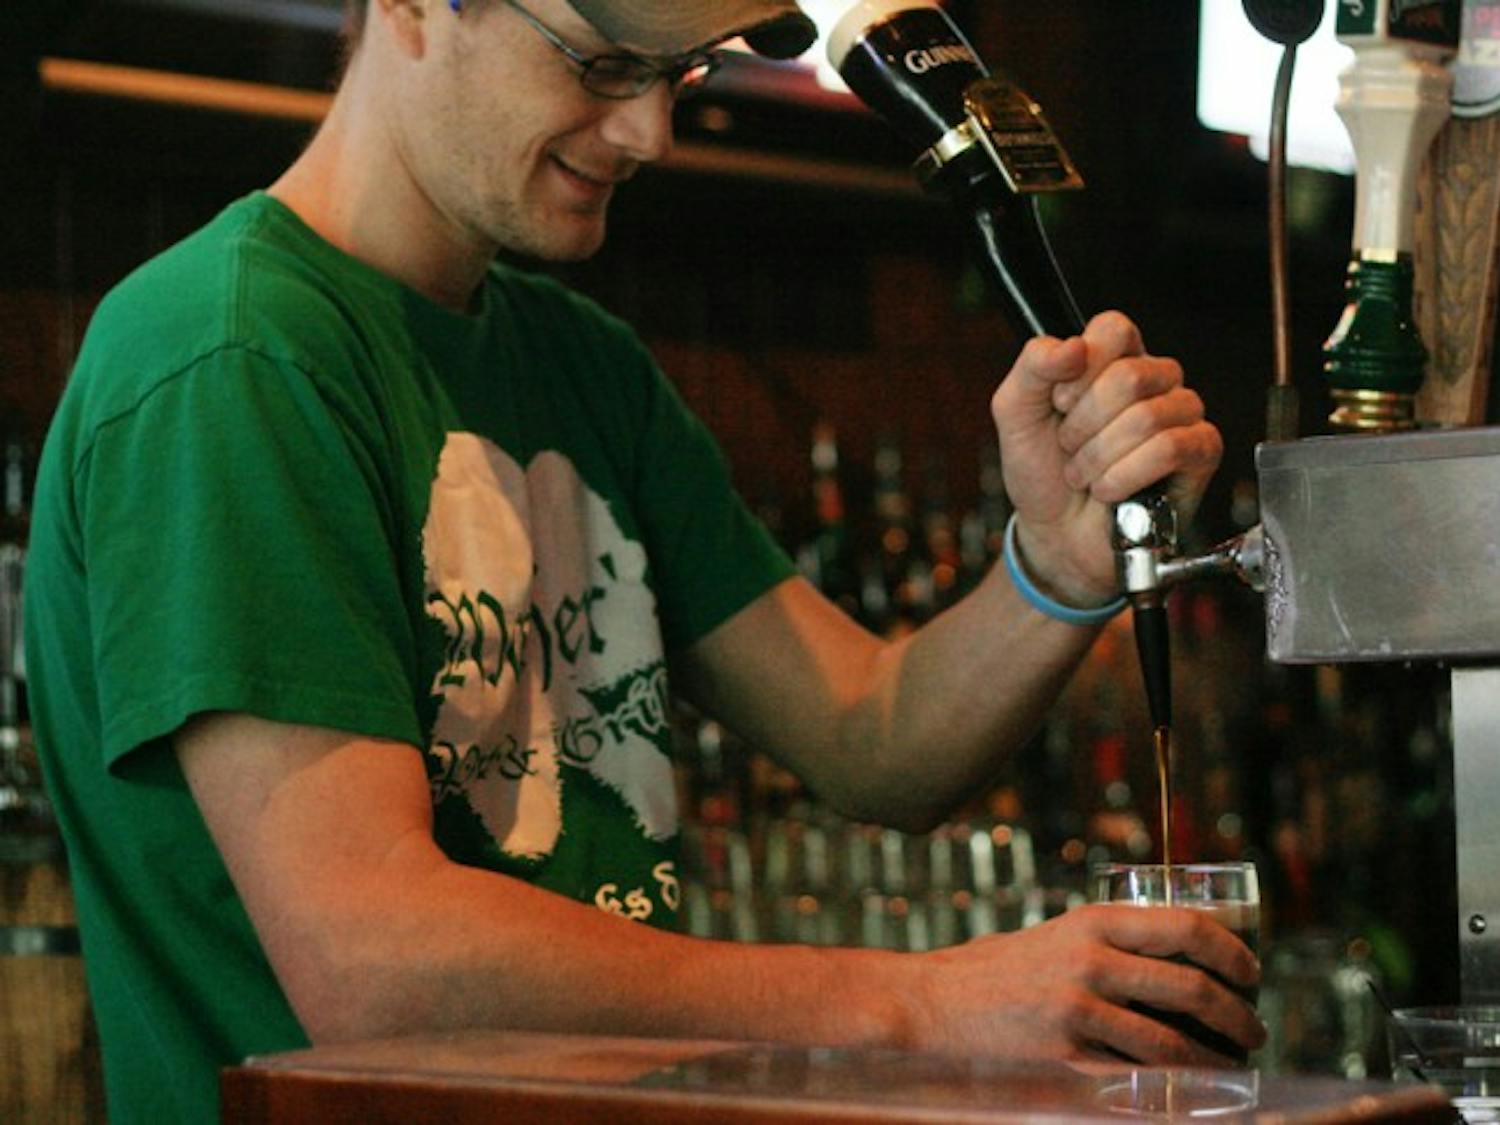 Nick Brigandi, a 28-year-old employee at Mother's Pub &amp; Grill, pours a beer on Wednesday afternoon. Brigandi and other employees are preparing for all the business on St. Patrick's Day by wearing shirts from last year's festivities.